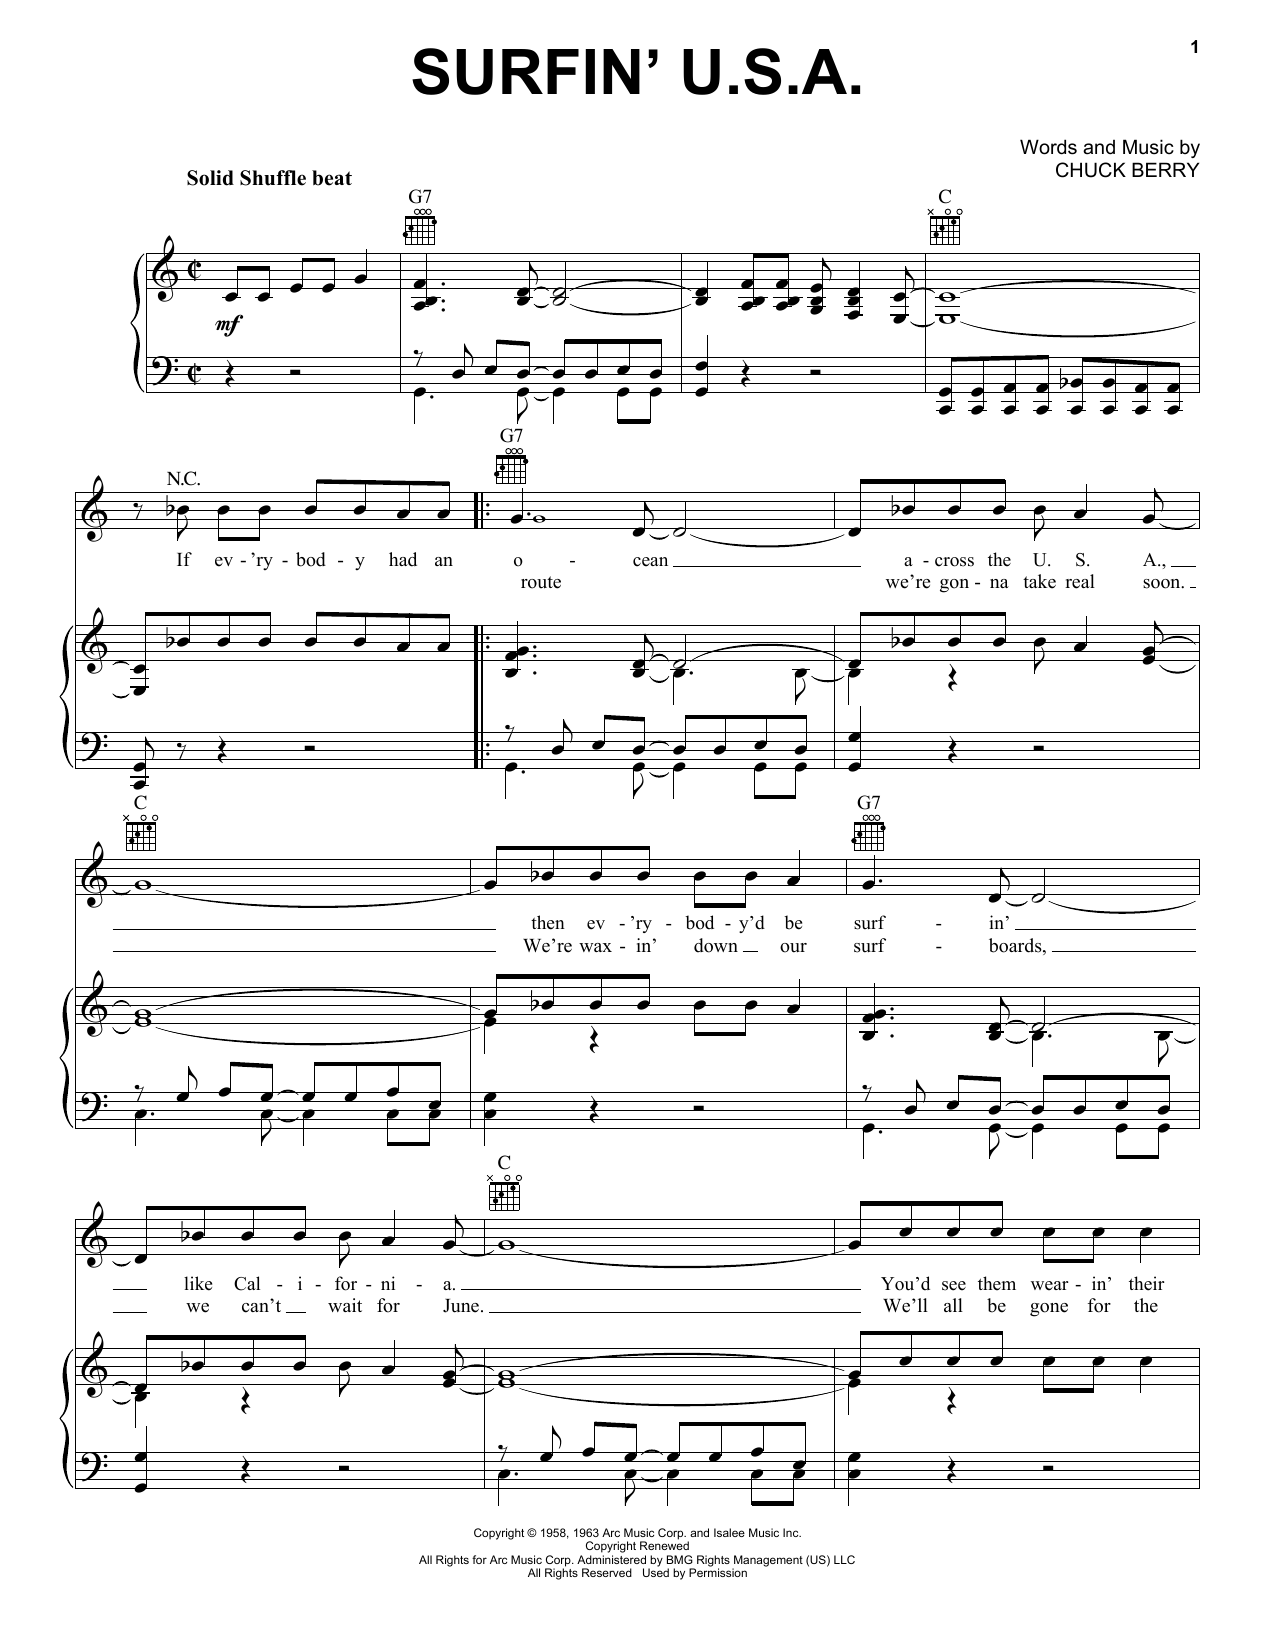 The Beach Boys Surfin' U.S.A. sheet music notes and chords. Download Printable PDF.